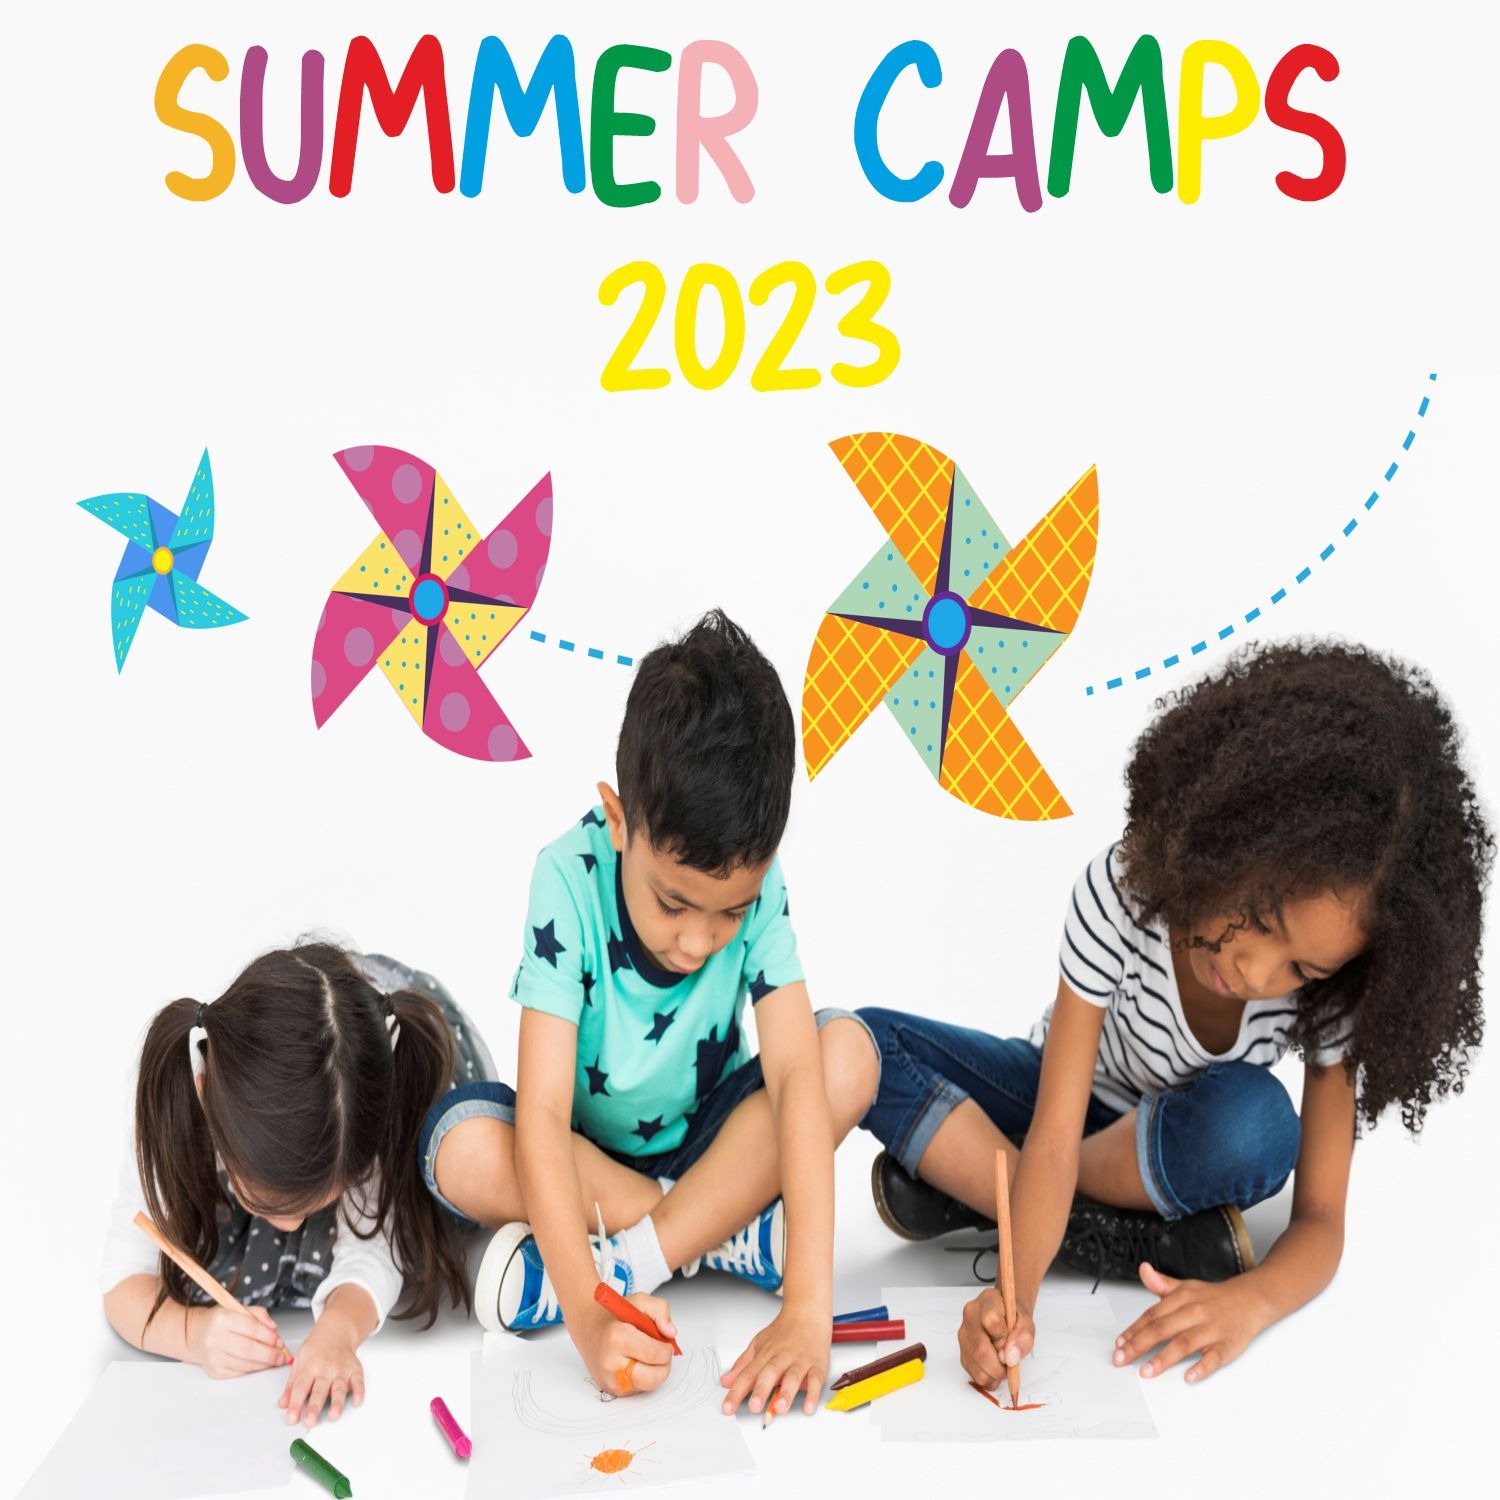 List of Summer Camps in Coimbatore 2023